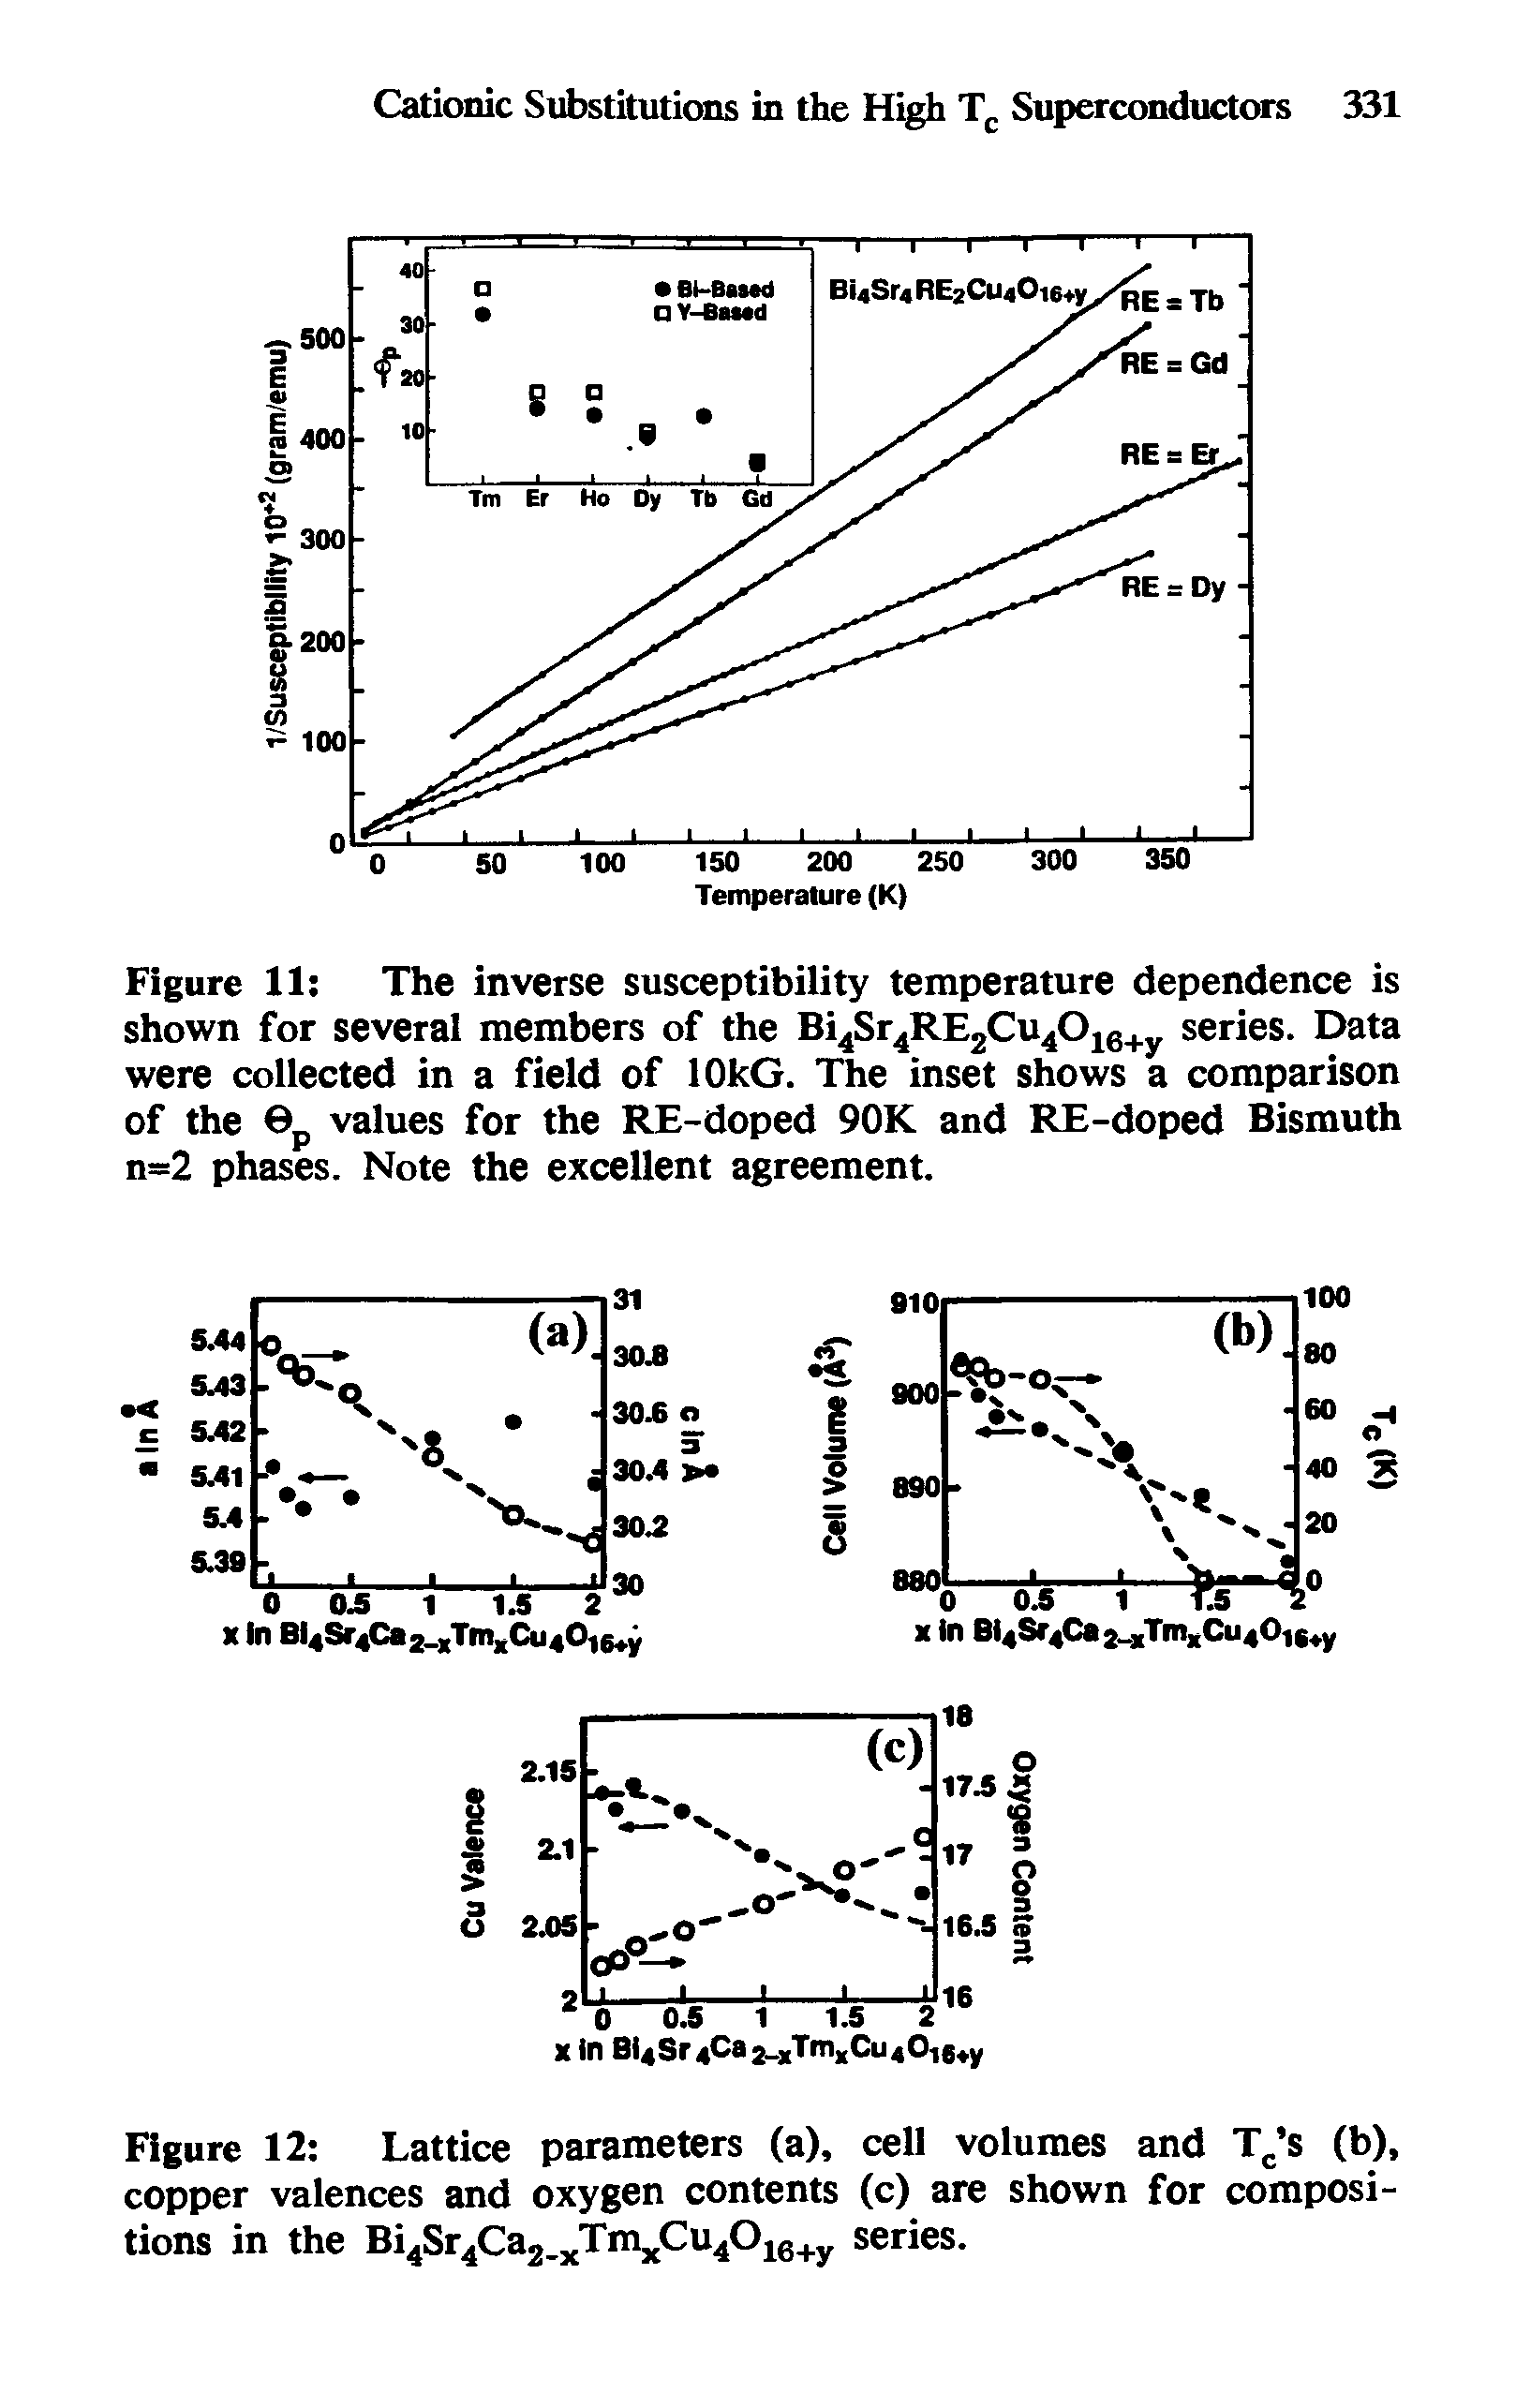 Figure 12 Lattice parameters (a), cell volumes and Tc s (b), copper valences and oxygen contents (c) are shown for compositions in the Bi4Sr4Ca2 xTmxCu4016+y series.